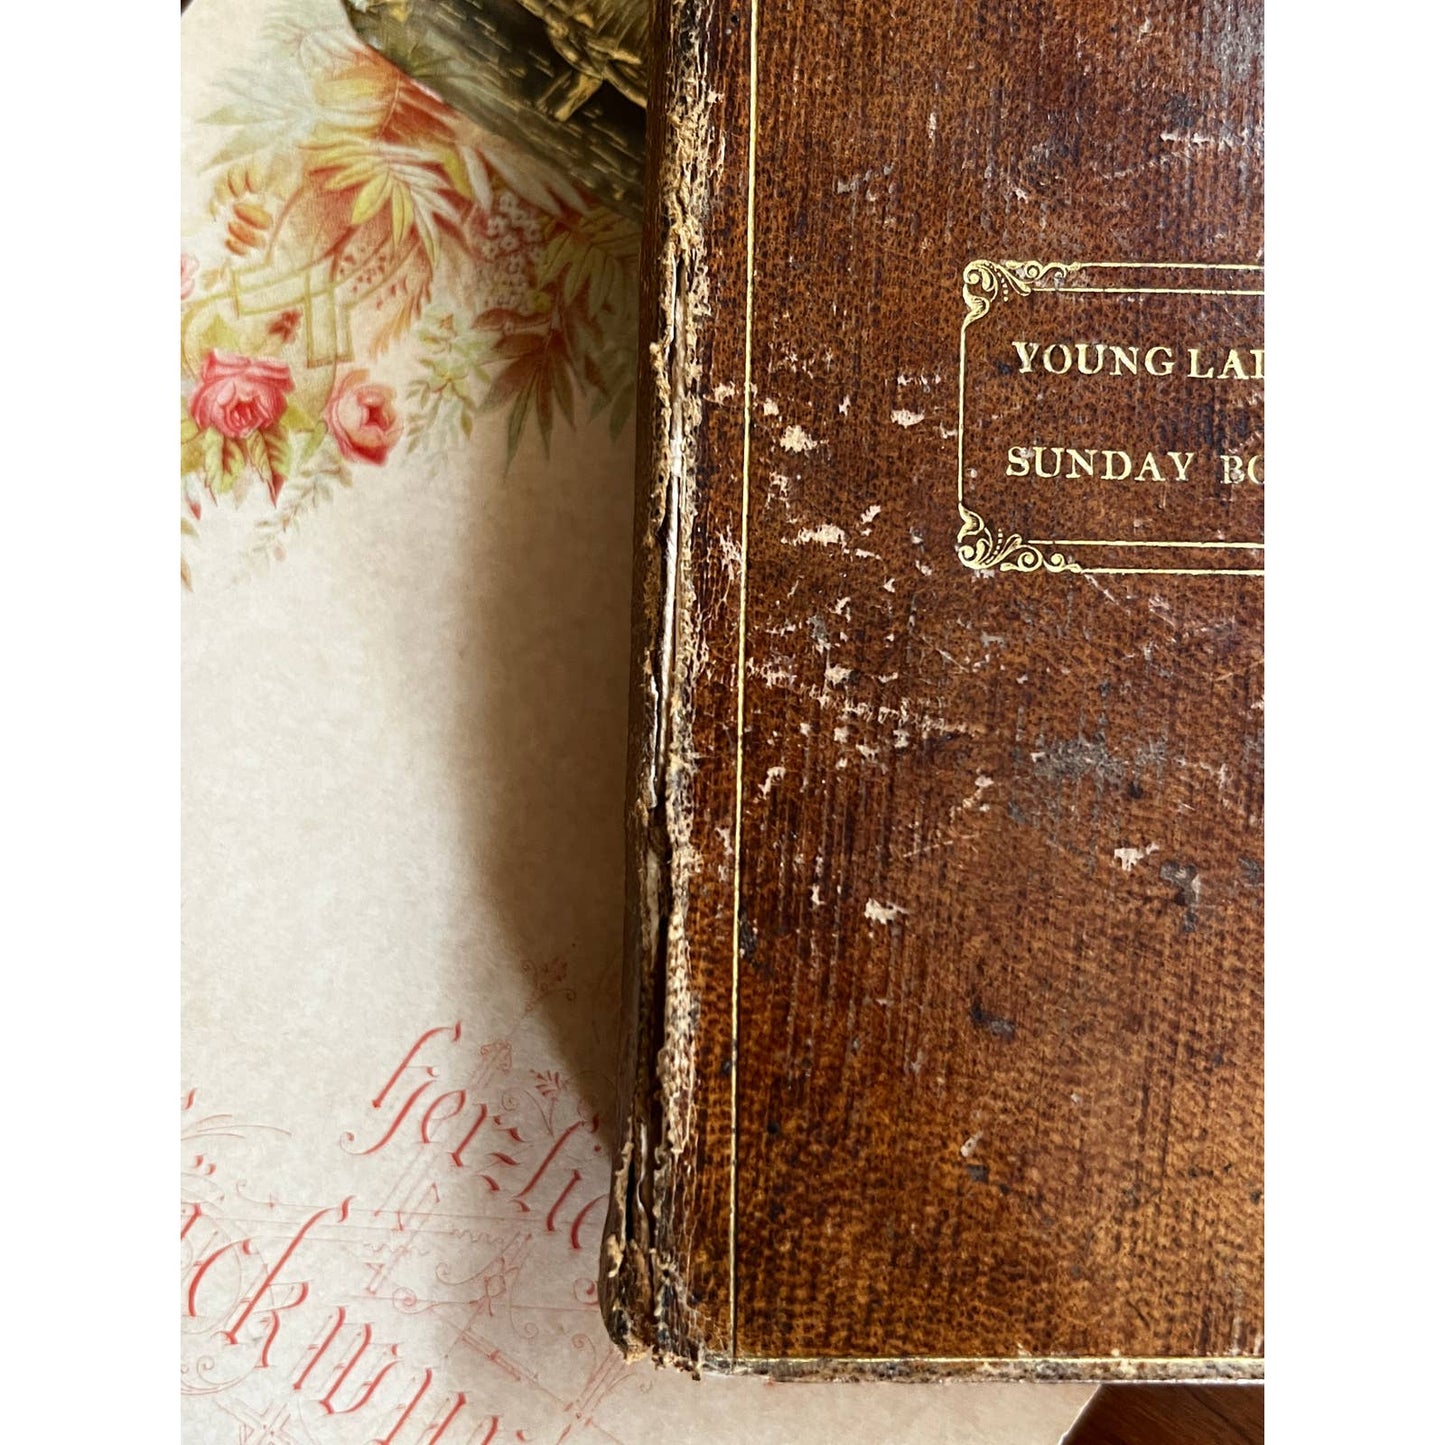 The Young Lady's Sunday Book - Key and Biddle, 1834